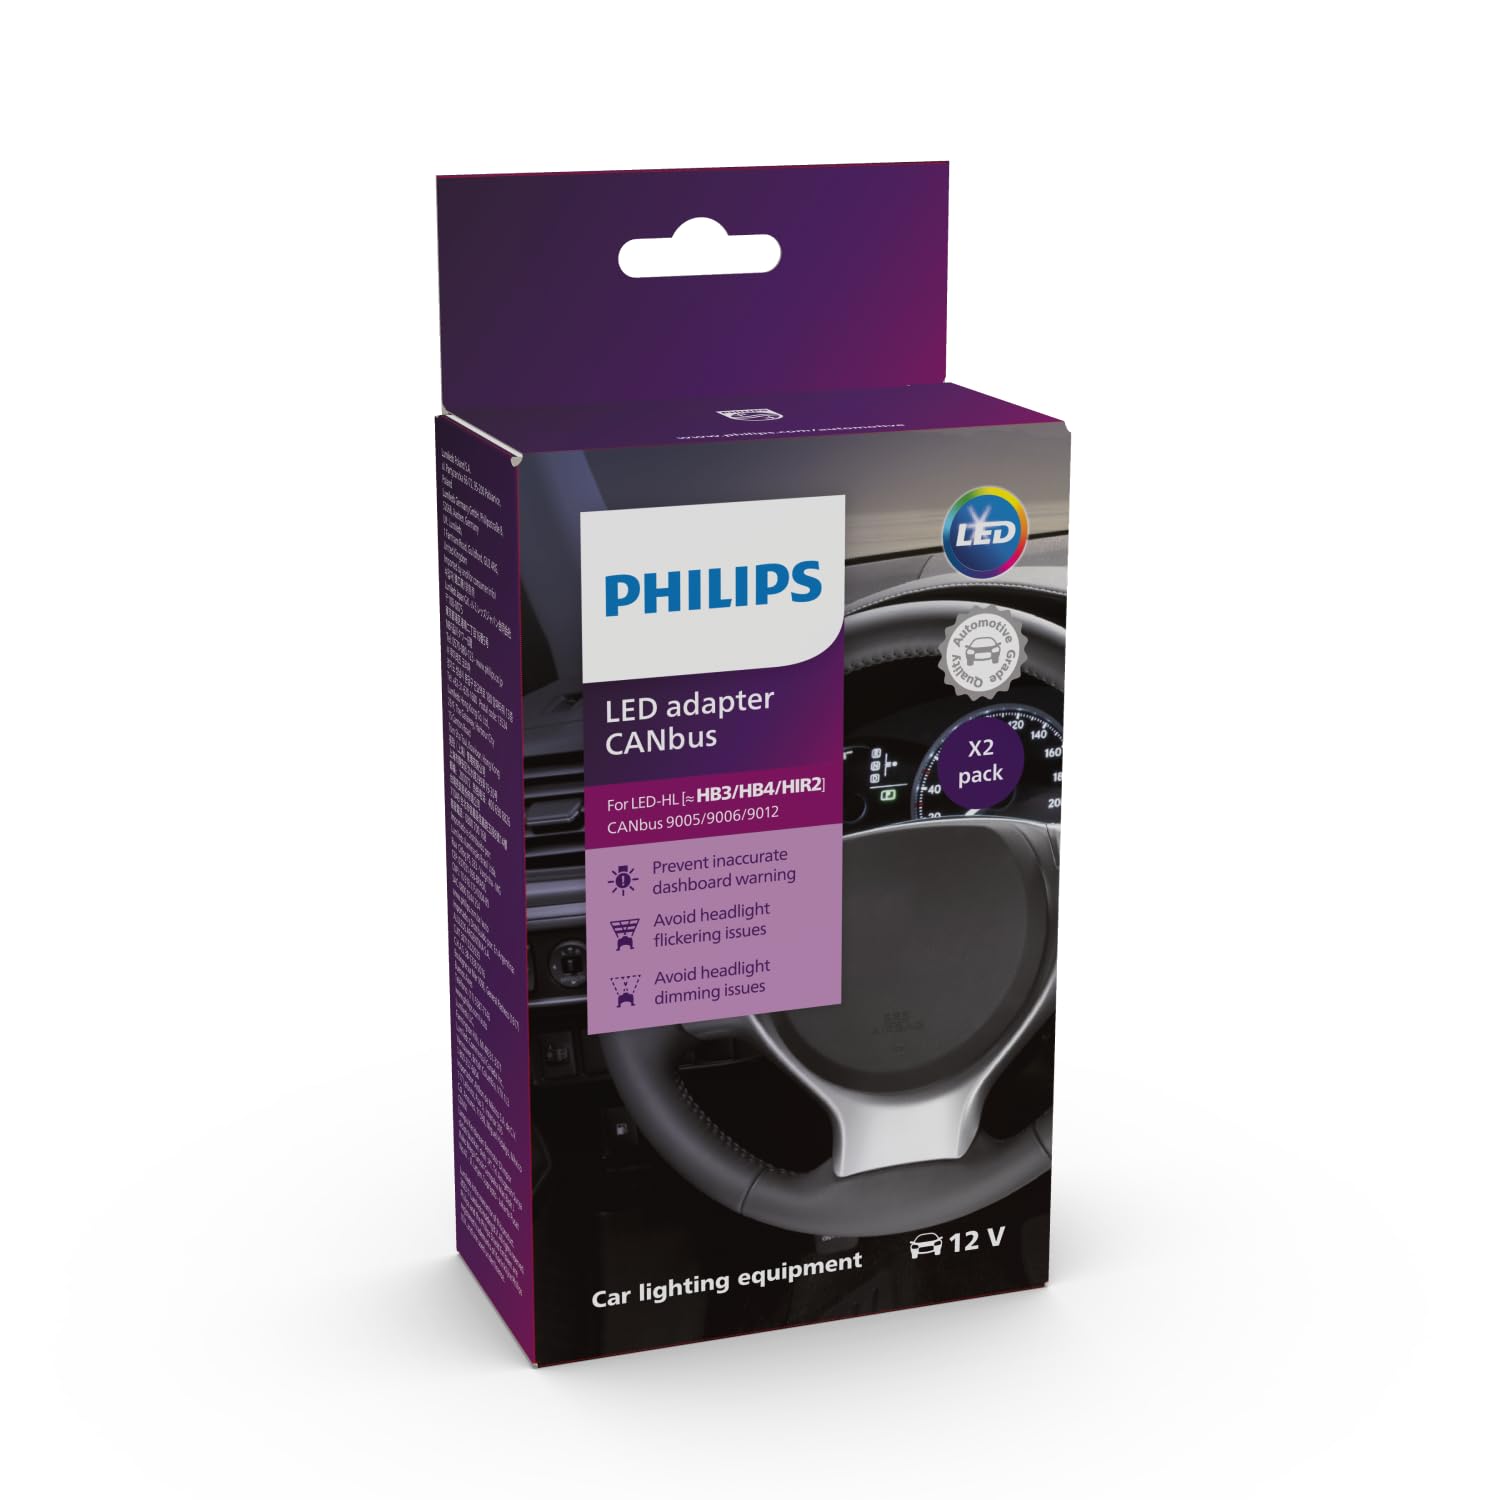 Philips Canbus Adapter LED (HB3/HB4/HIR2) 3in1 Lösung 2er Set von Philips